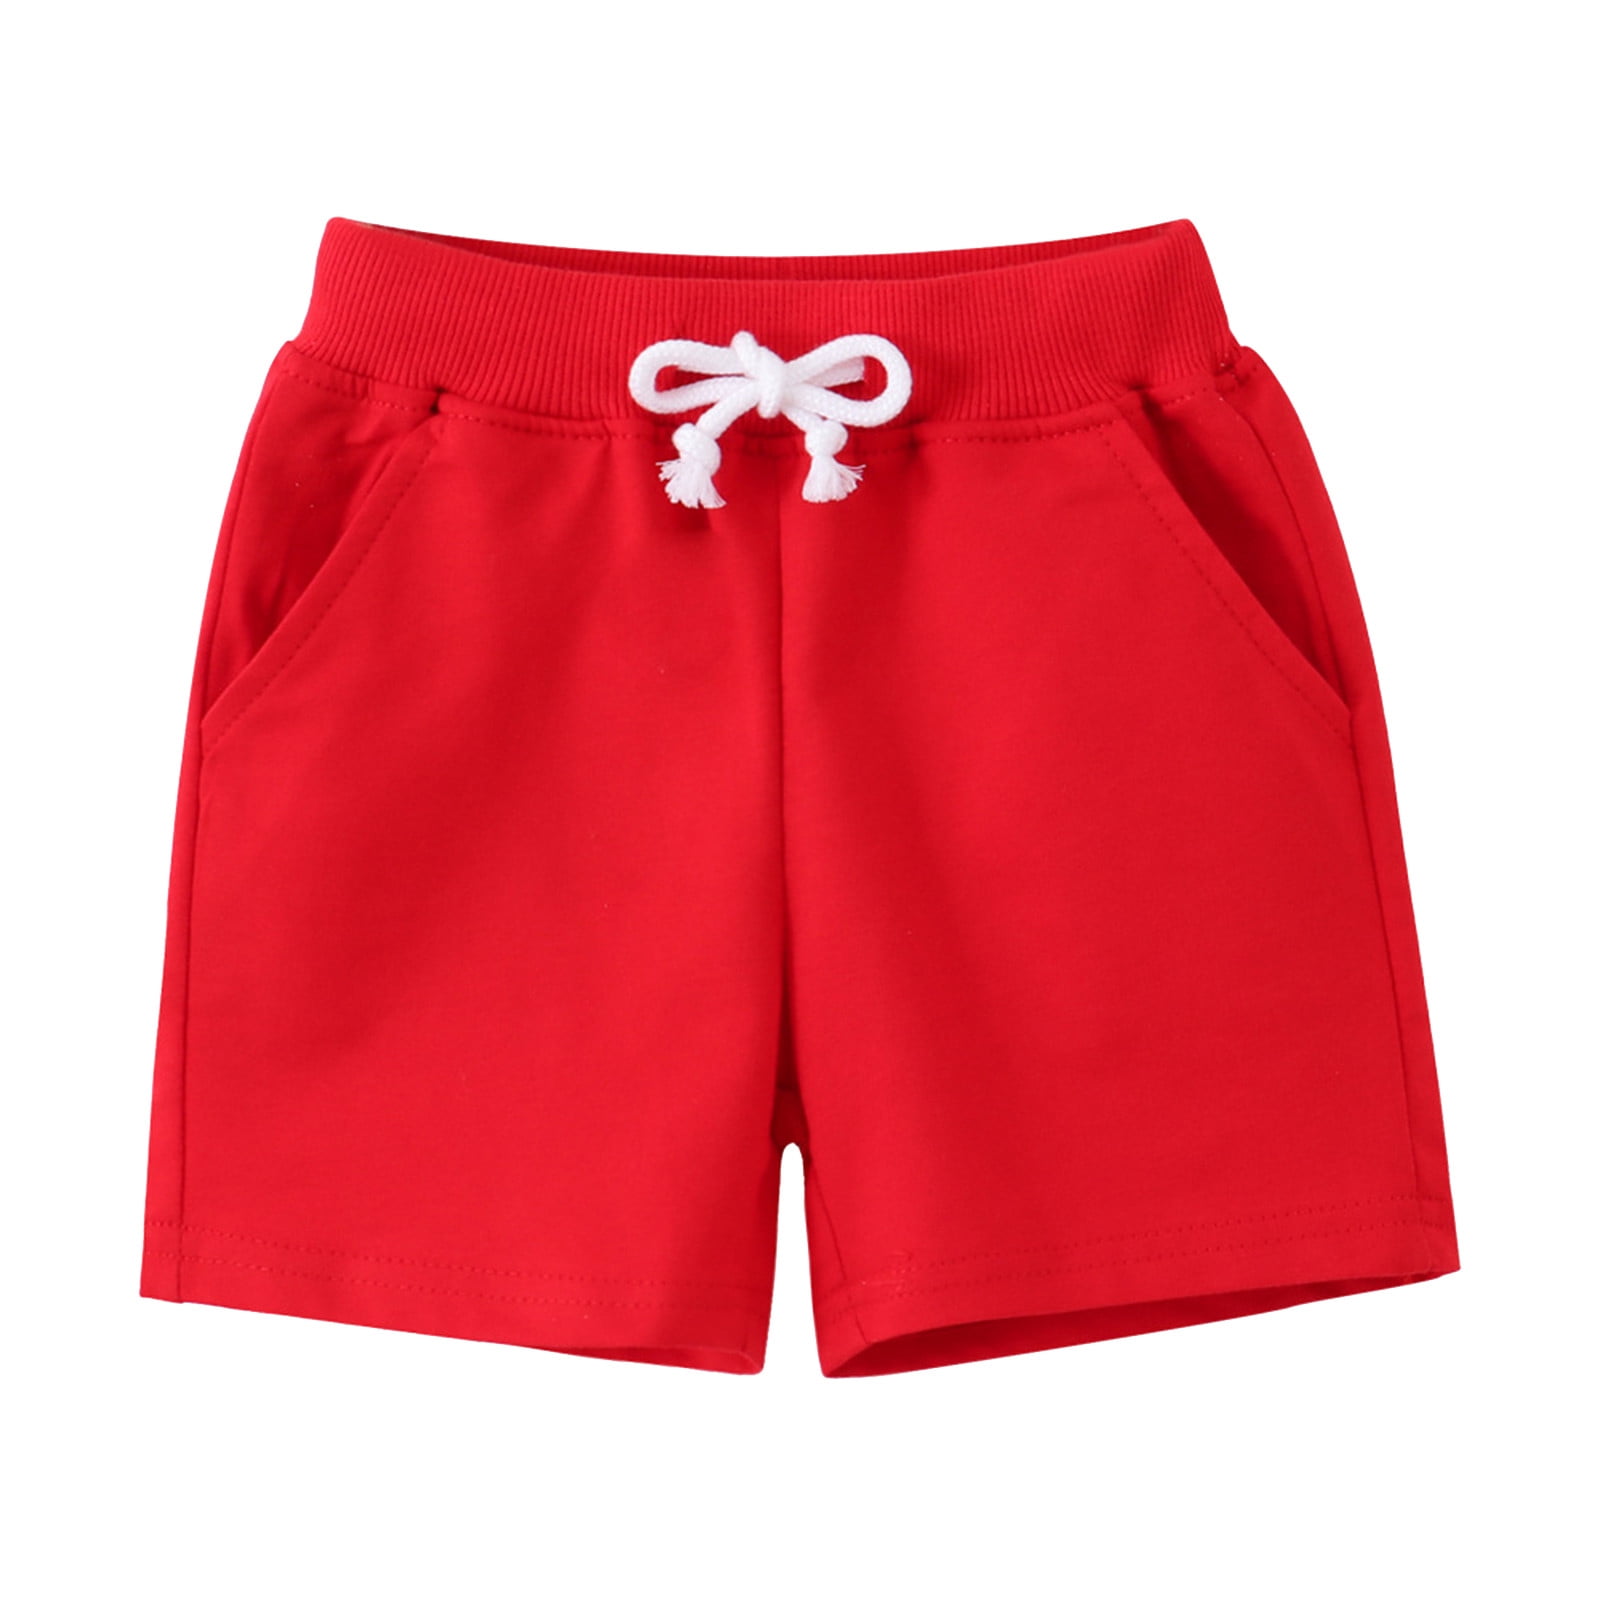 Pedort Girls Shorts Casual Shorts Toddlers Workout Active Running Shorts  Gym Short Pants Red,5T 